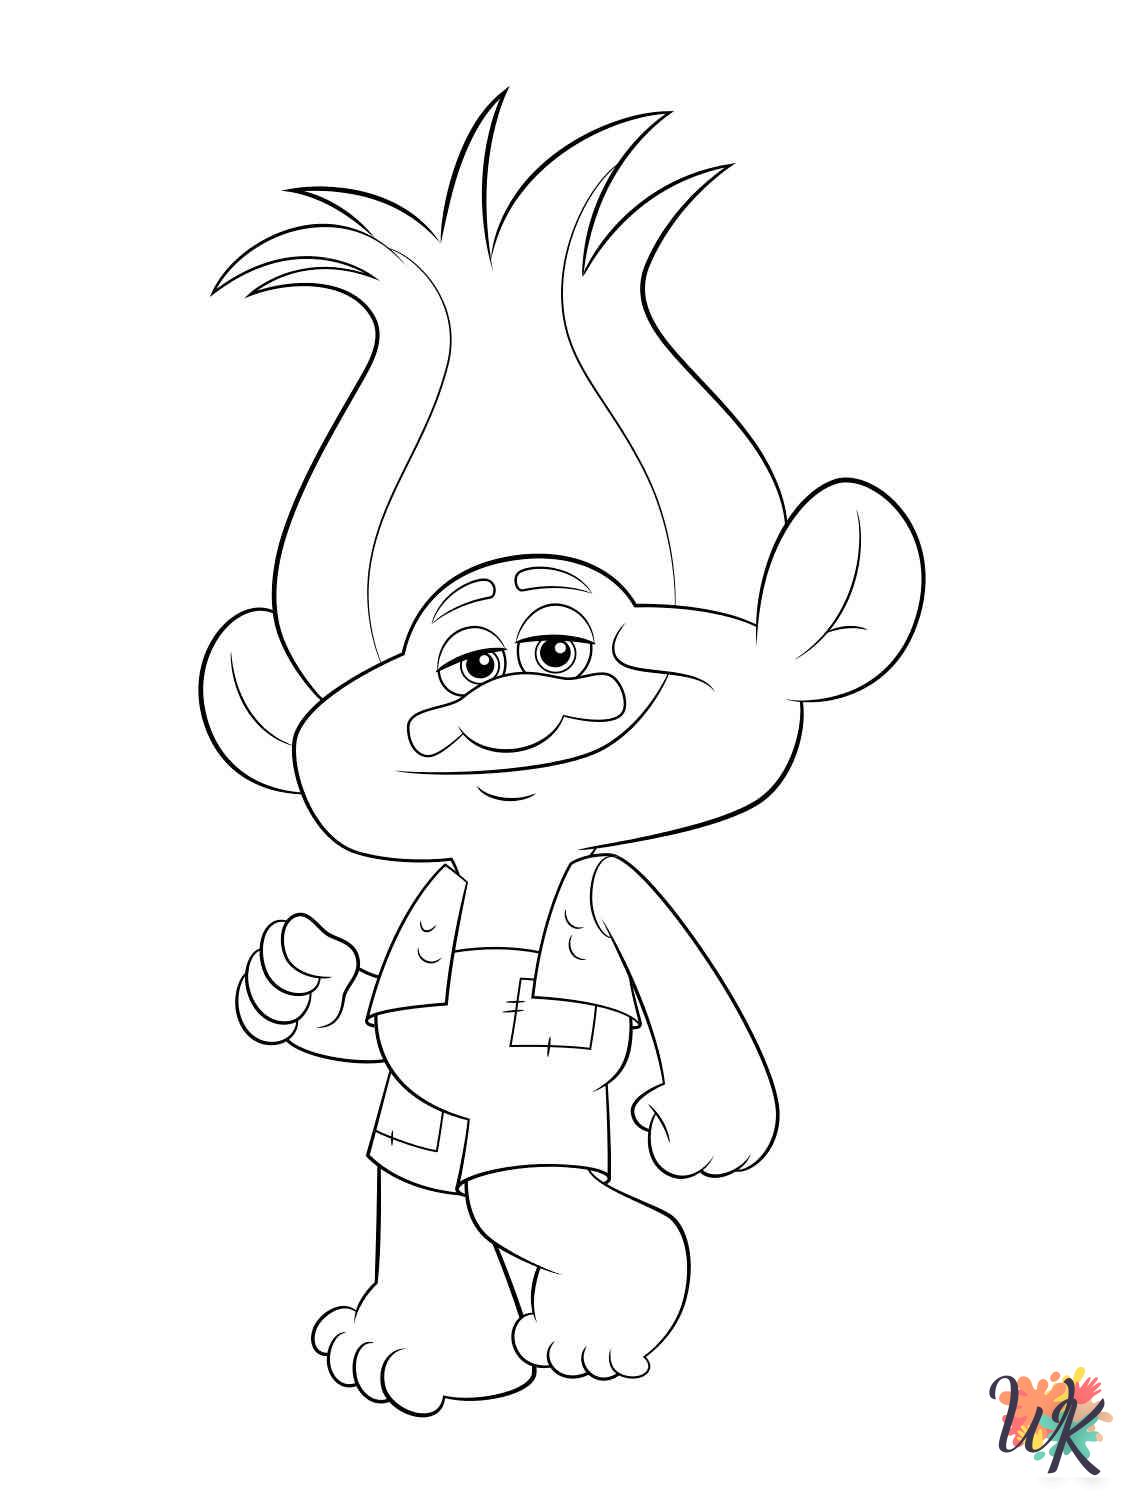 Trolls coloring pages to print